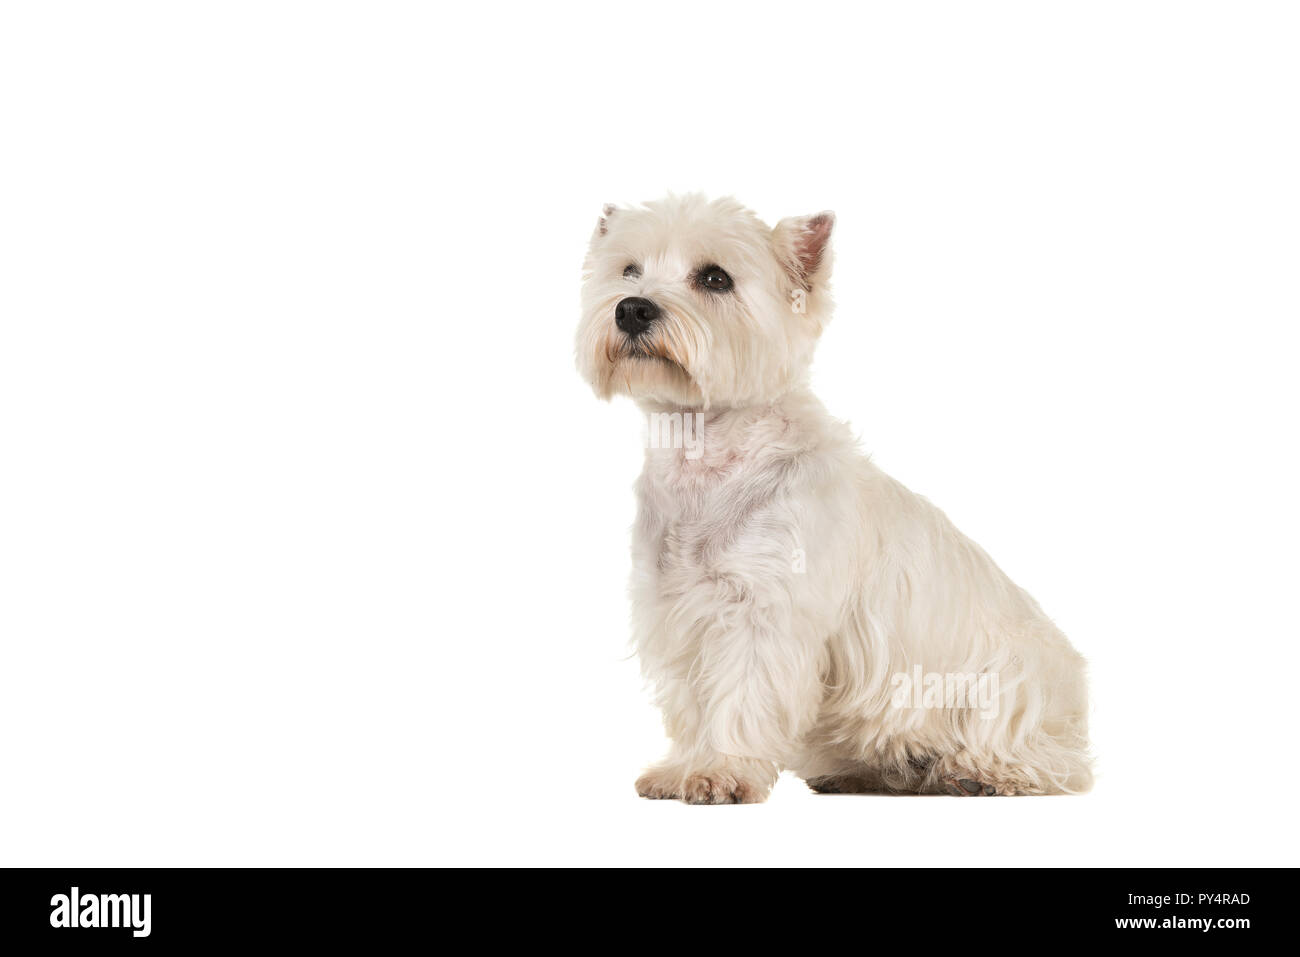 West highland white terrier or westie dog sitting looking up seen from the side isolated on a white background Stock Photo